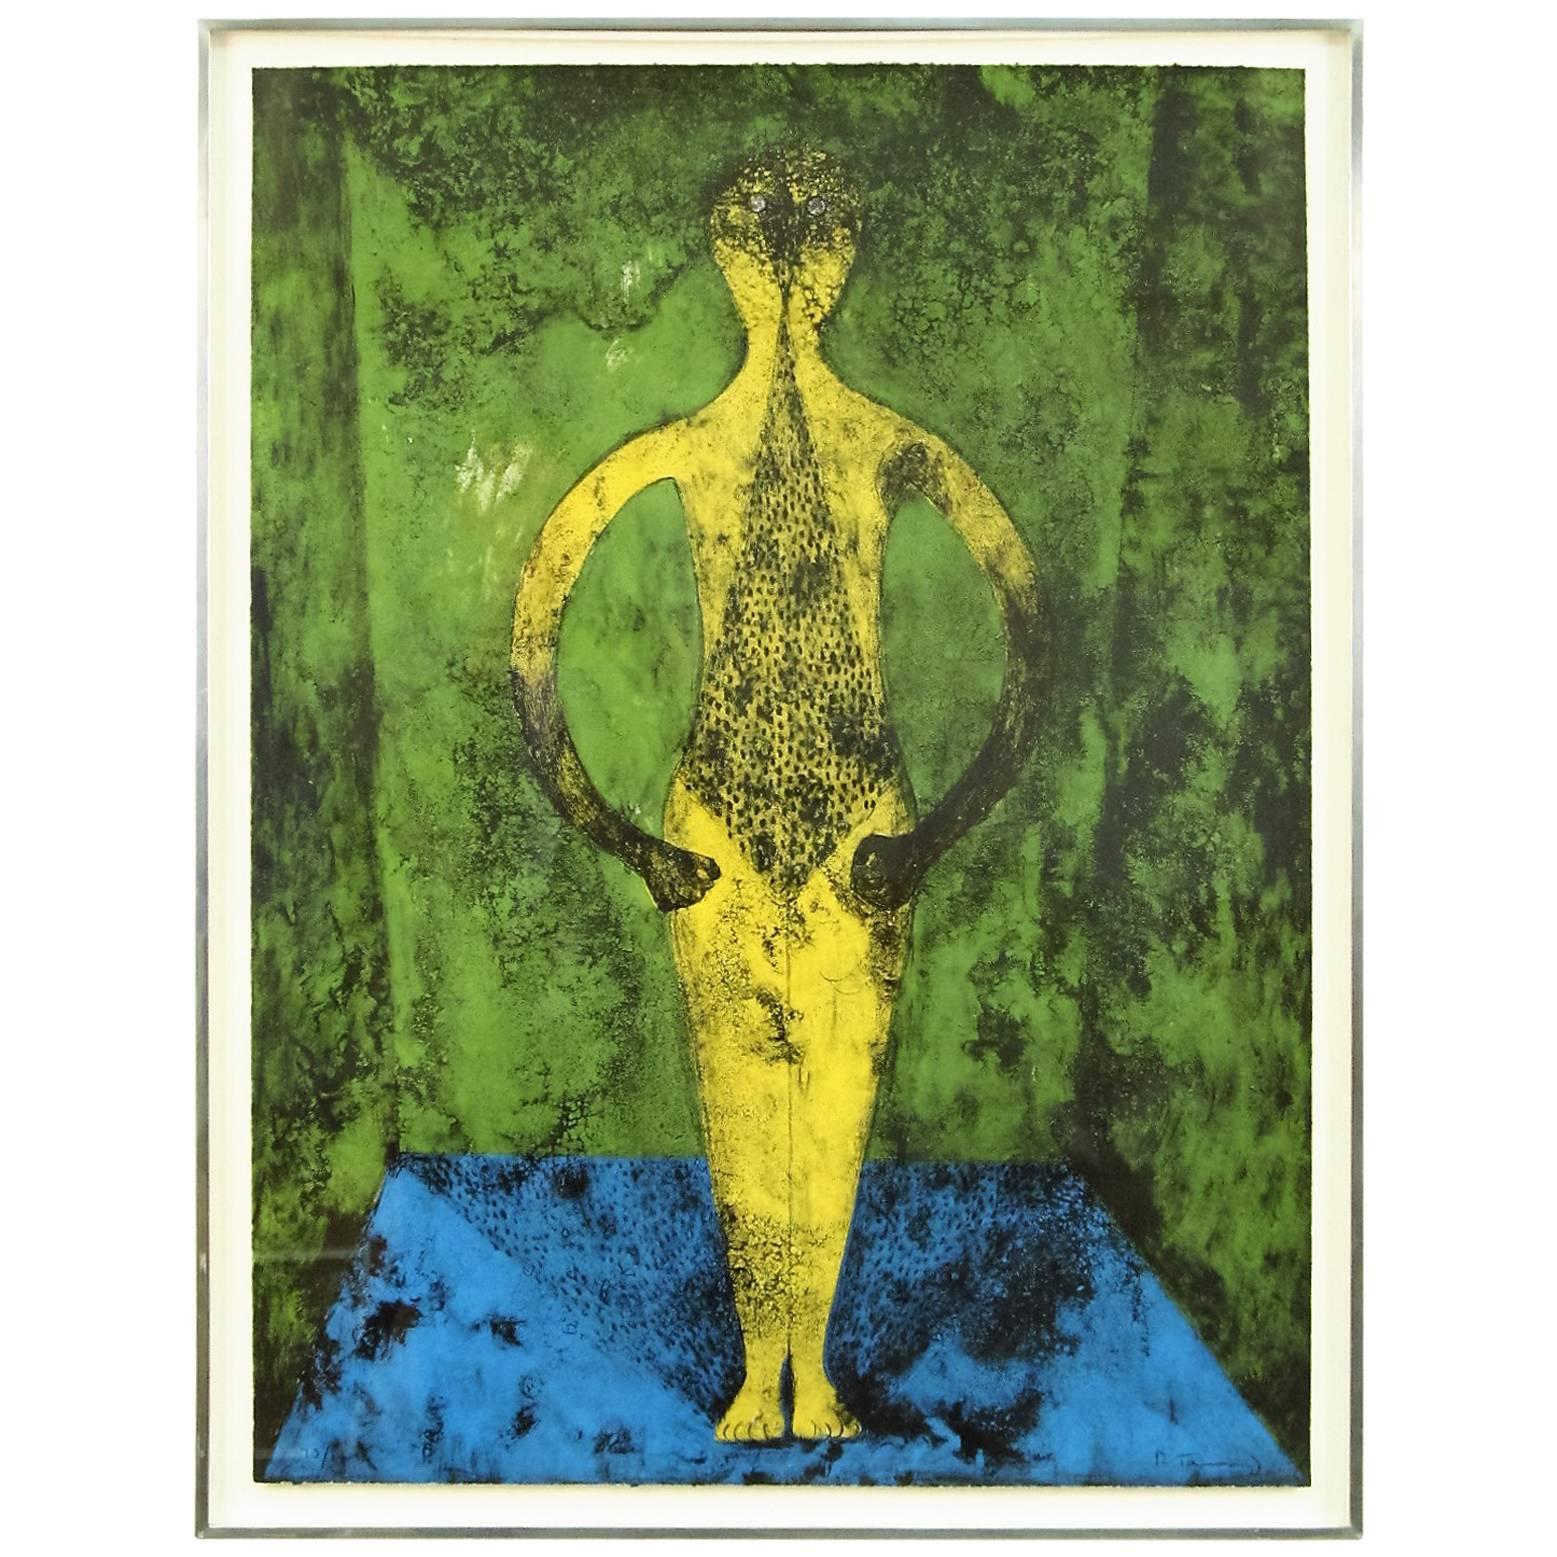 Four Color Stone Lithograph "El Personnage" by Rufino Tamayo with Documentation For Sale